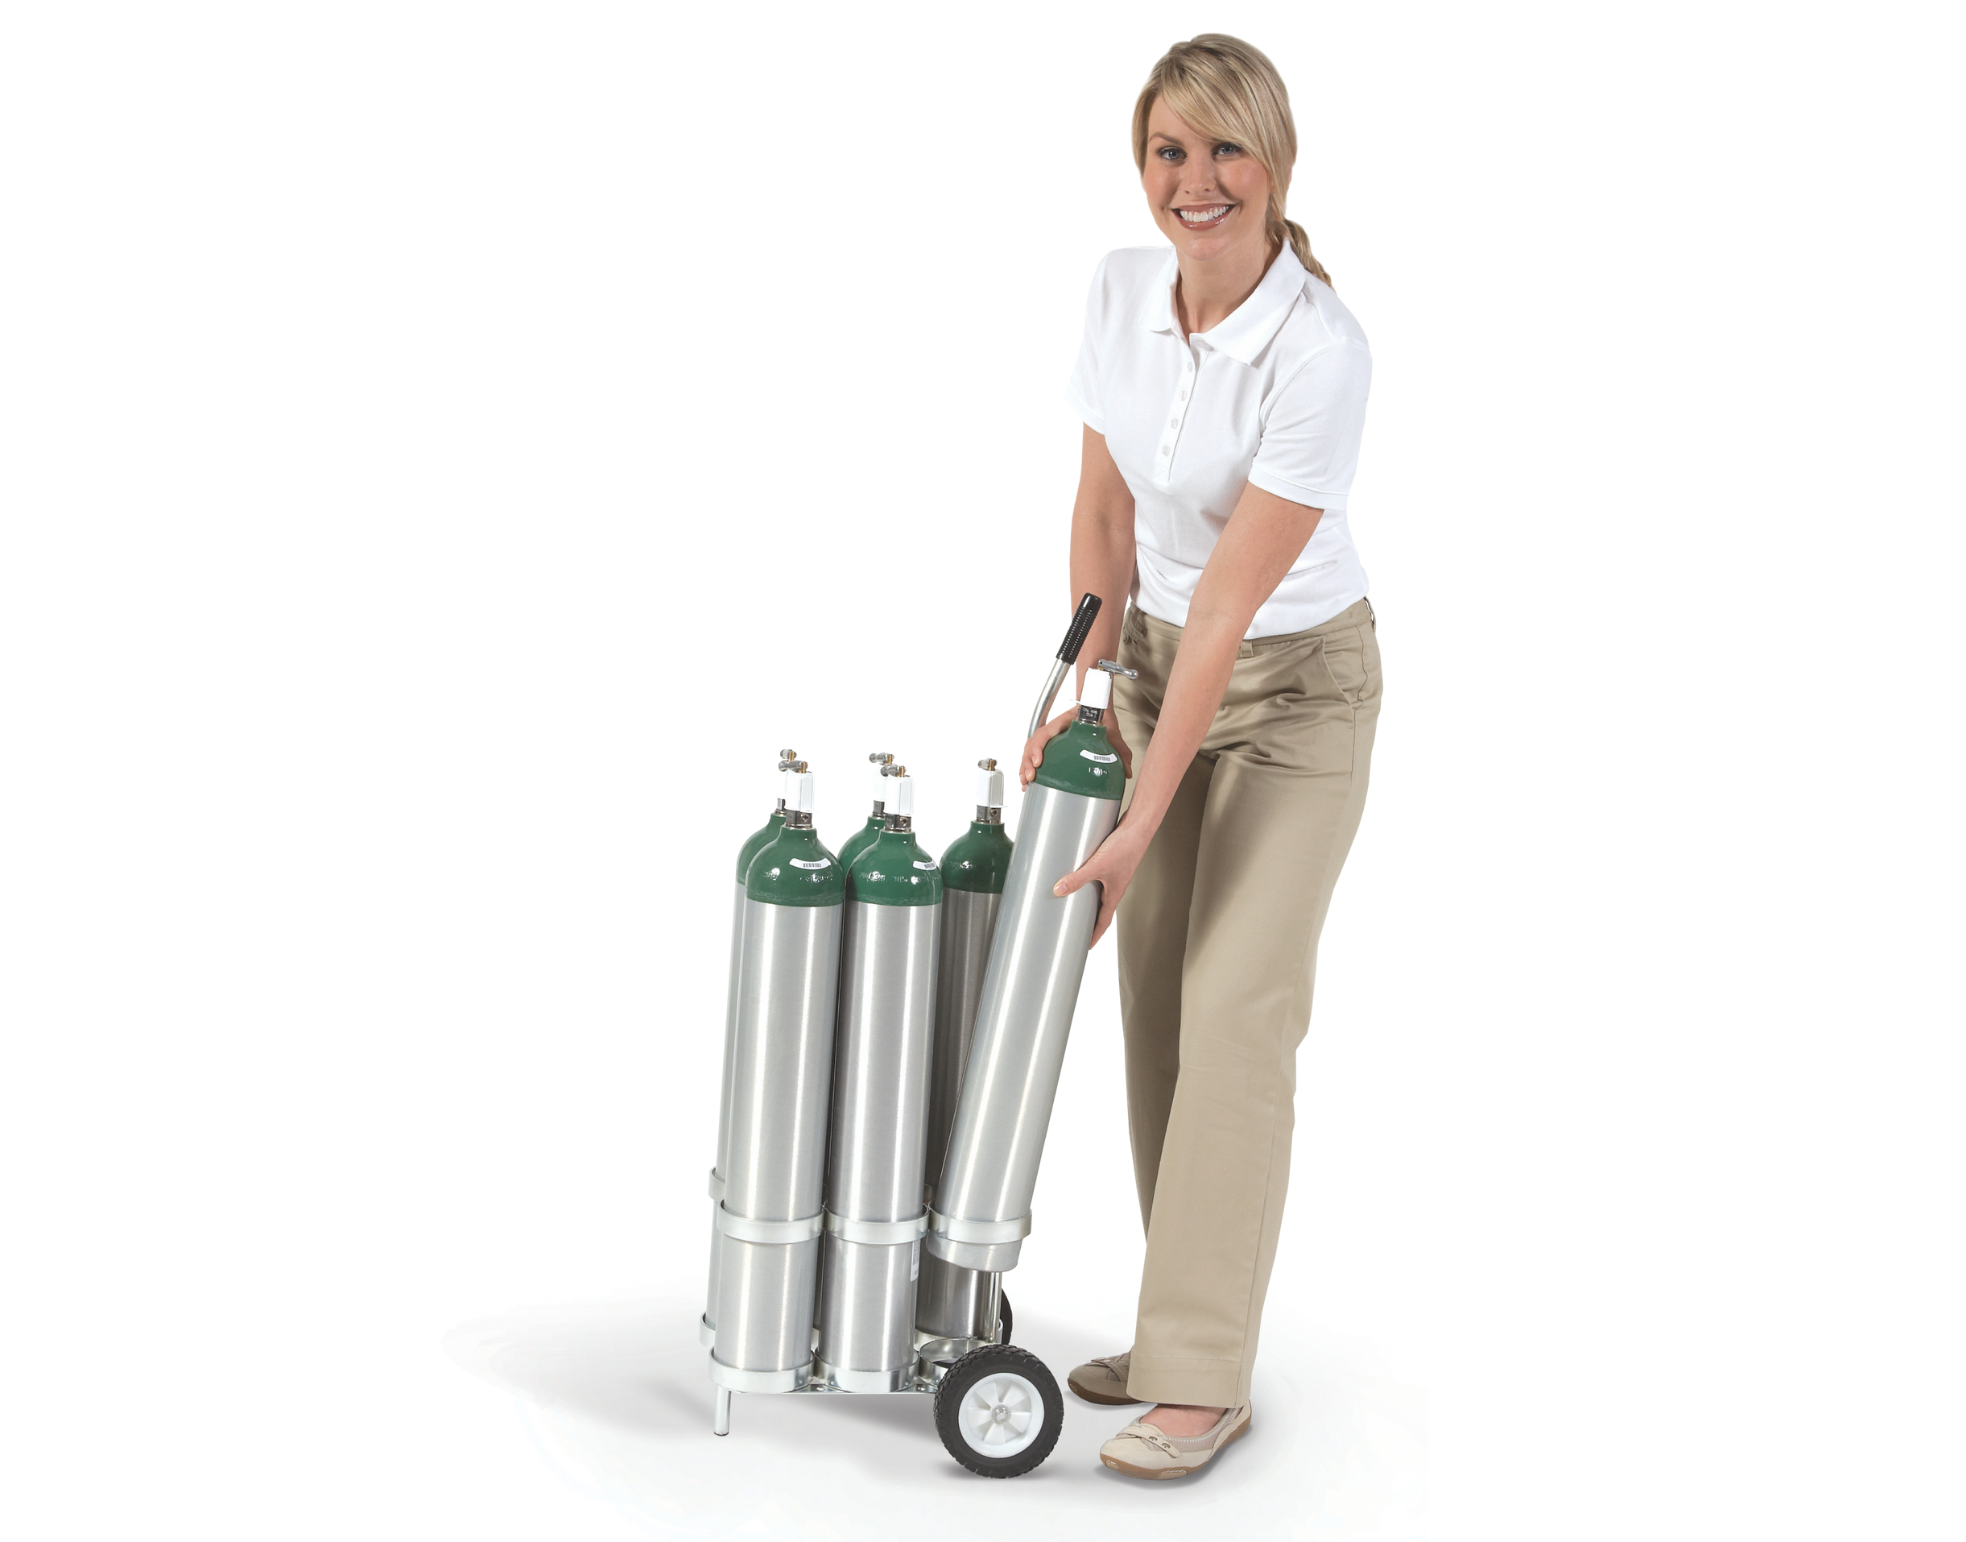 Using Carriers, Bags or Carts When Handling Cylinders